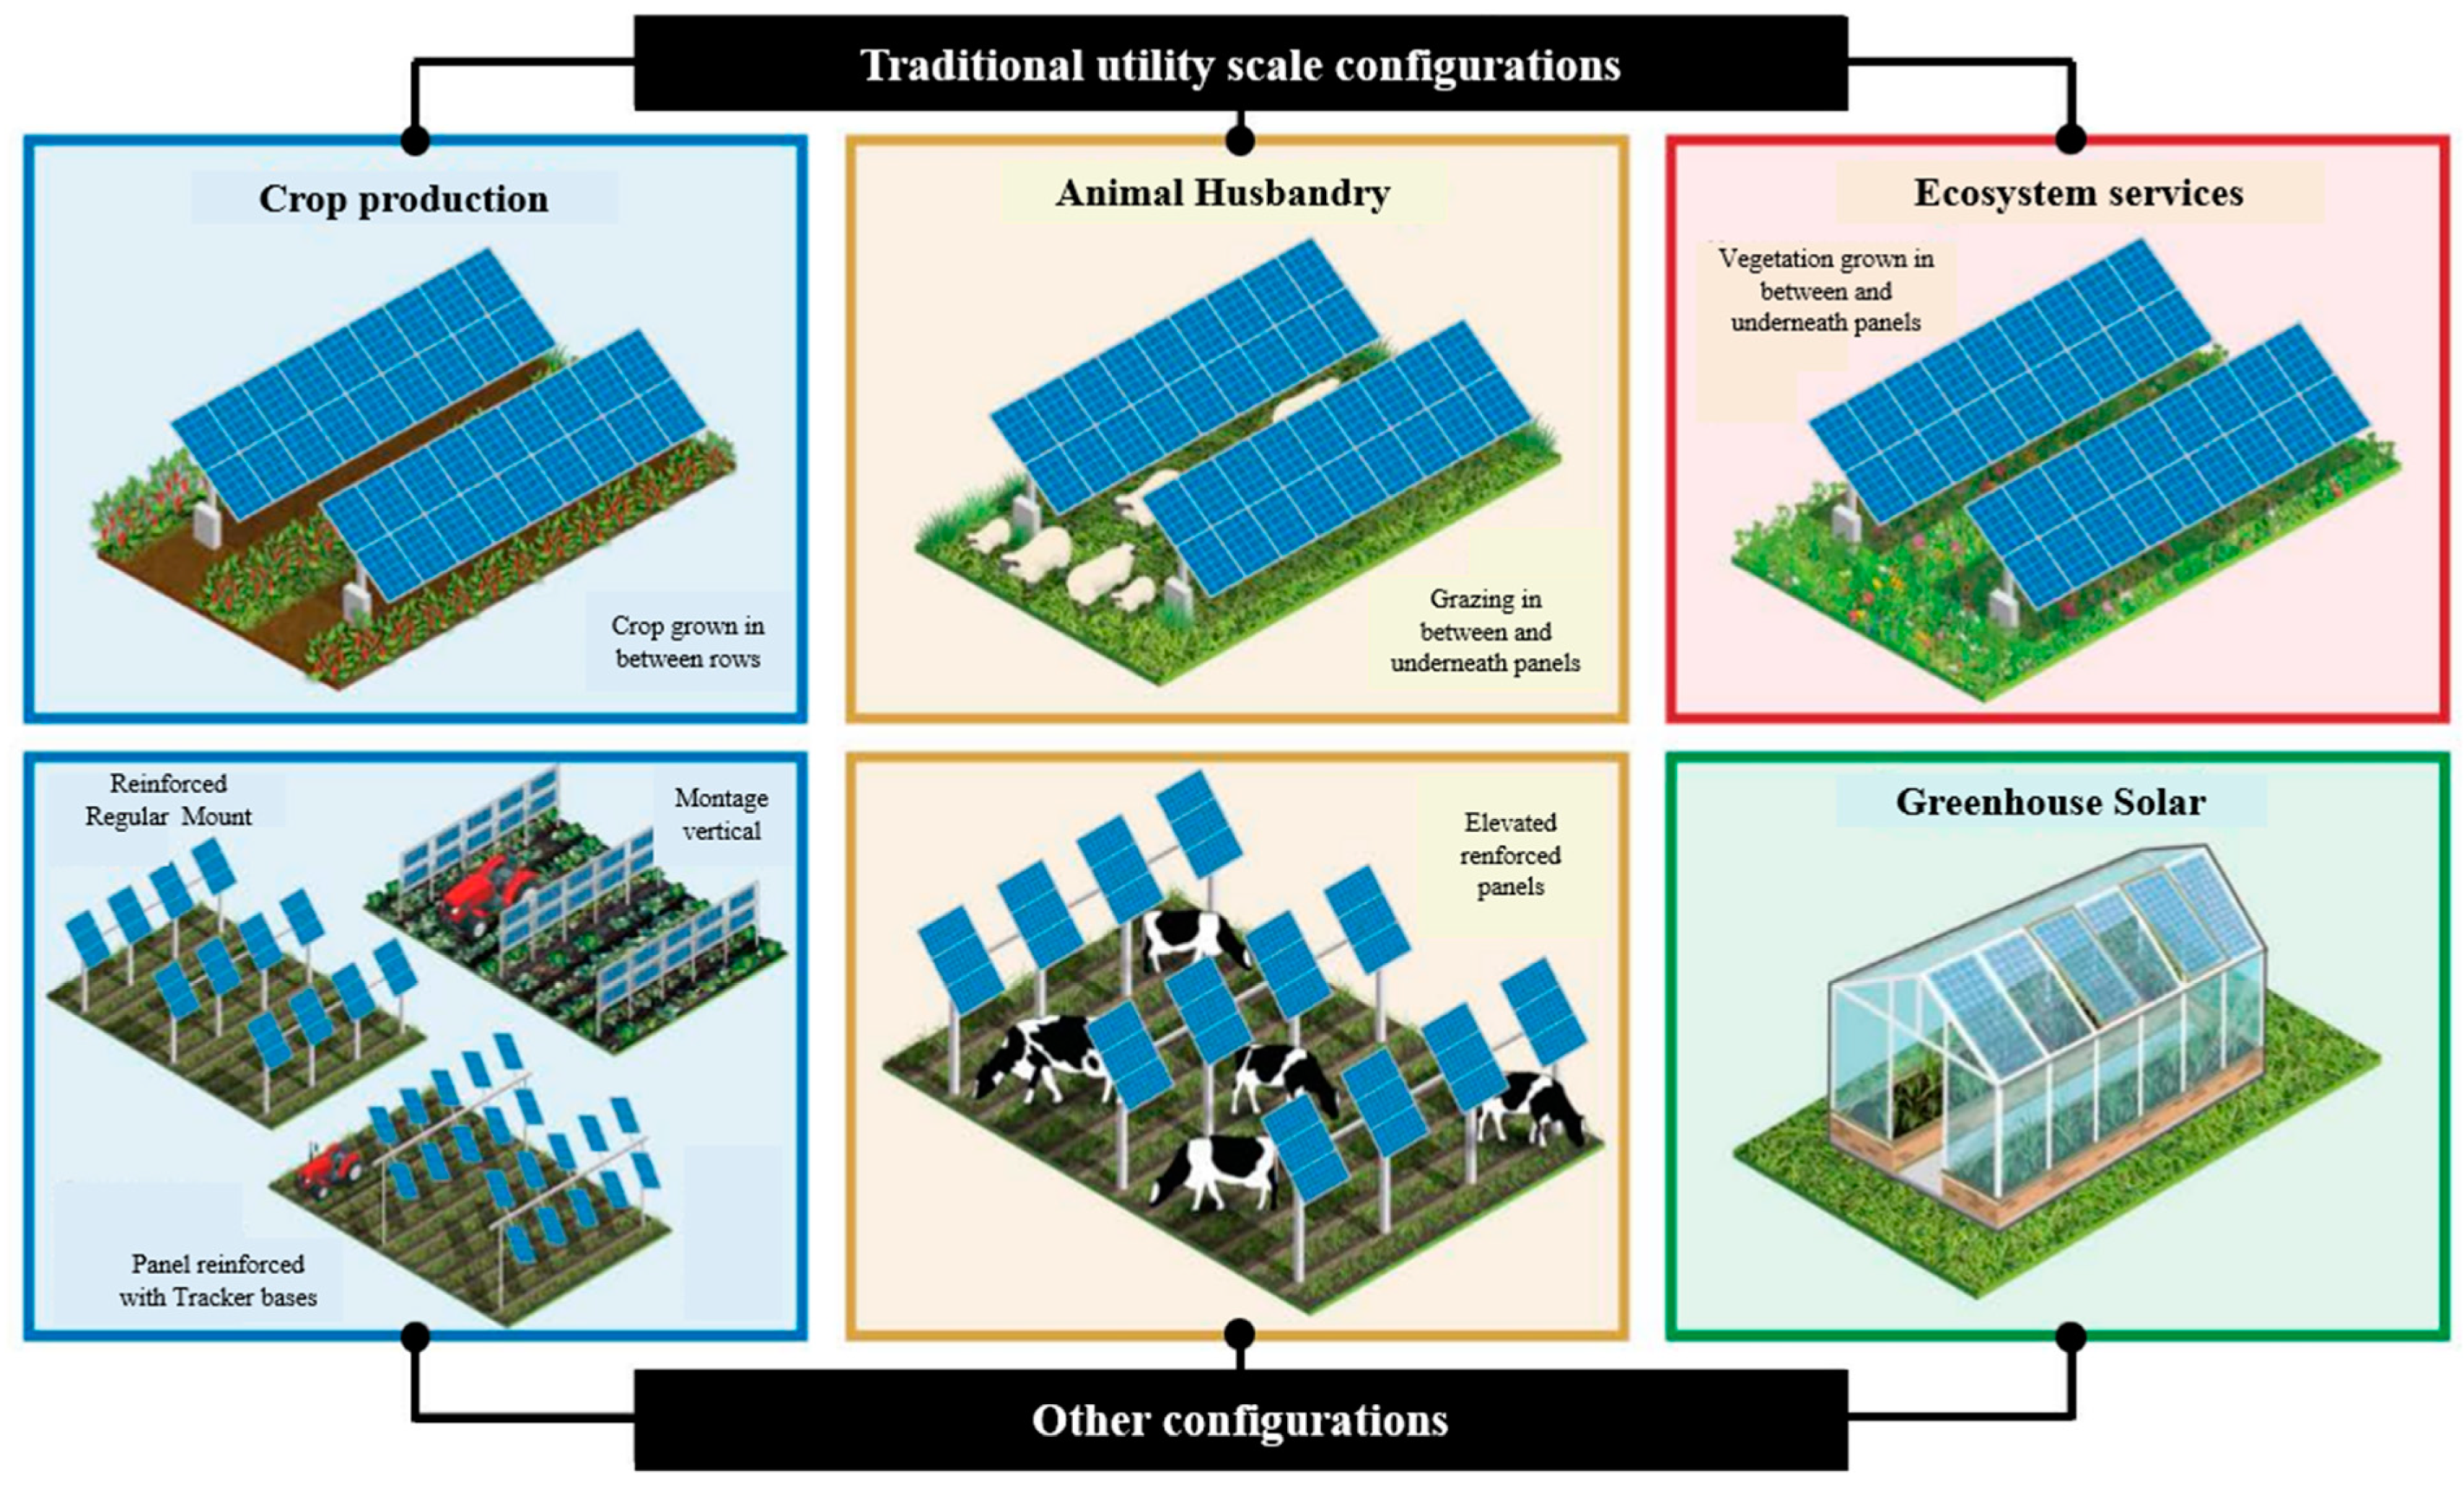 Increased Spacing of Solar Panels Comes With Benefits, News